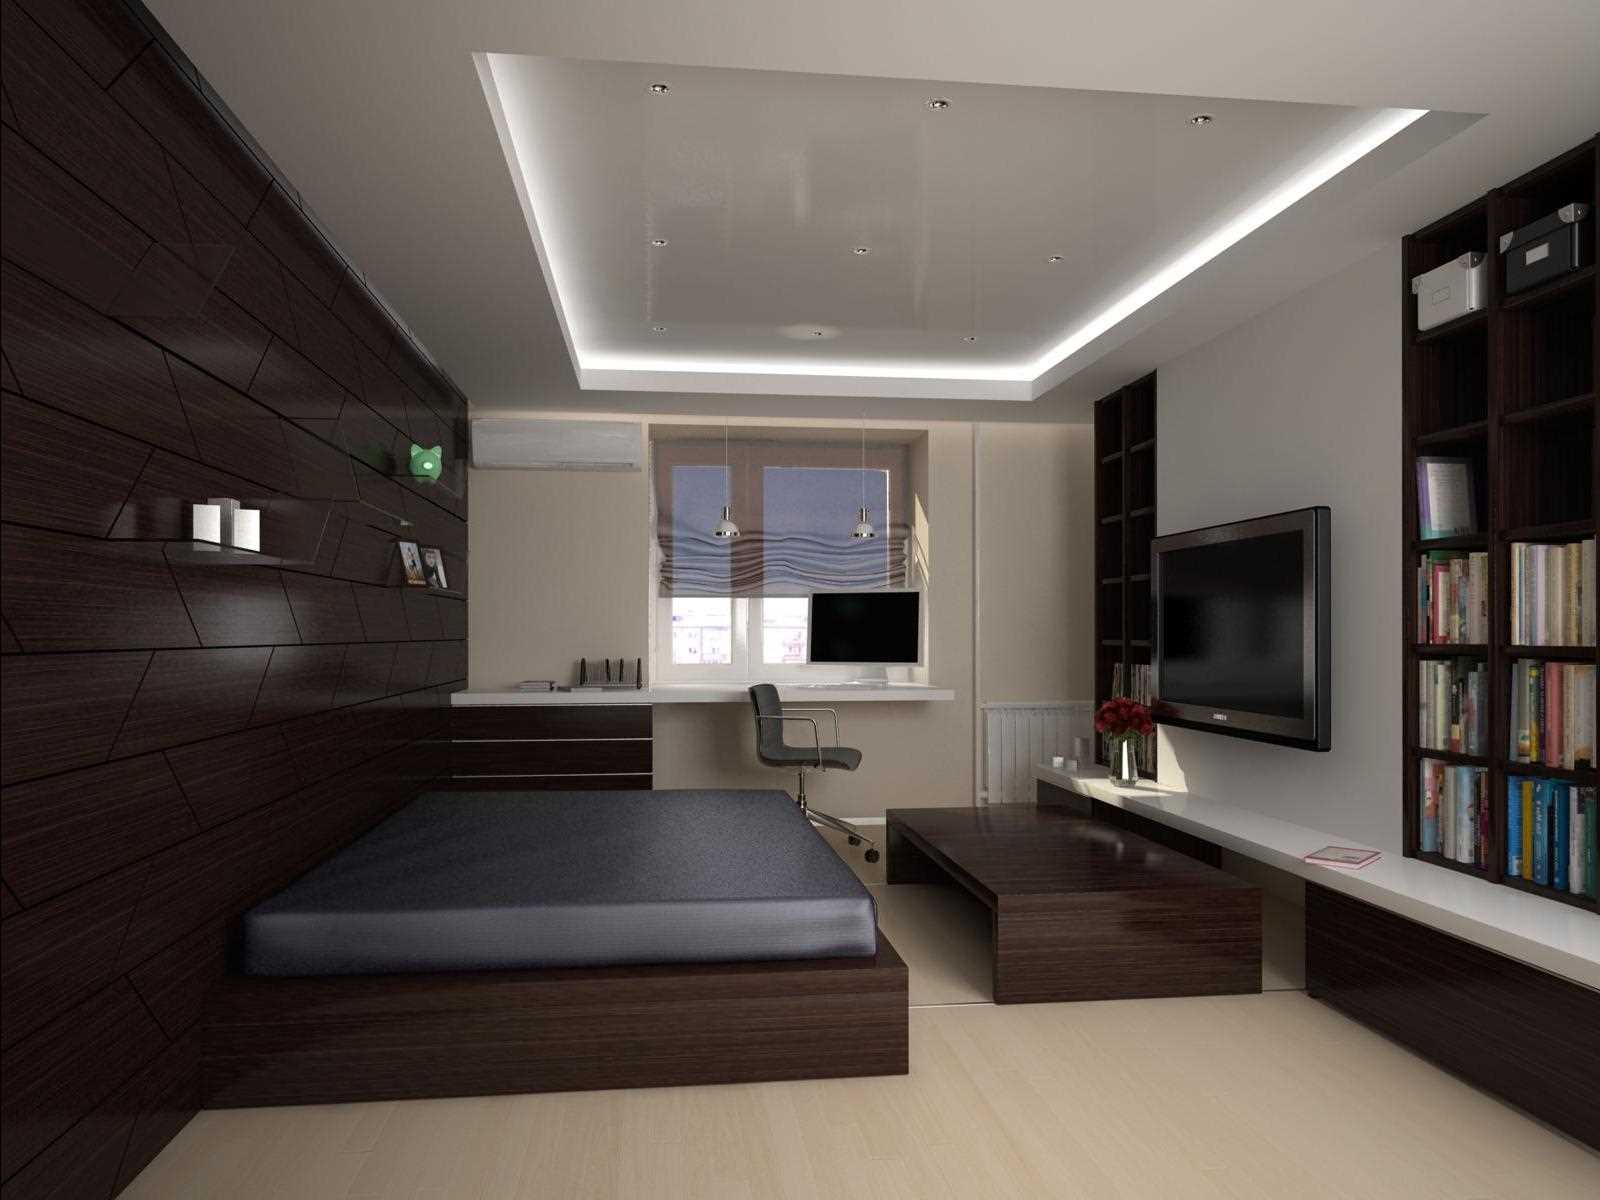 the idea of ​​an unusual bedroom style for a young man